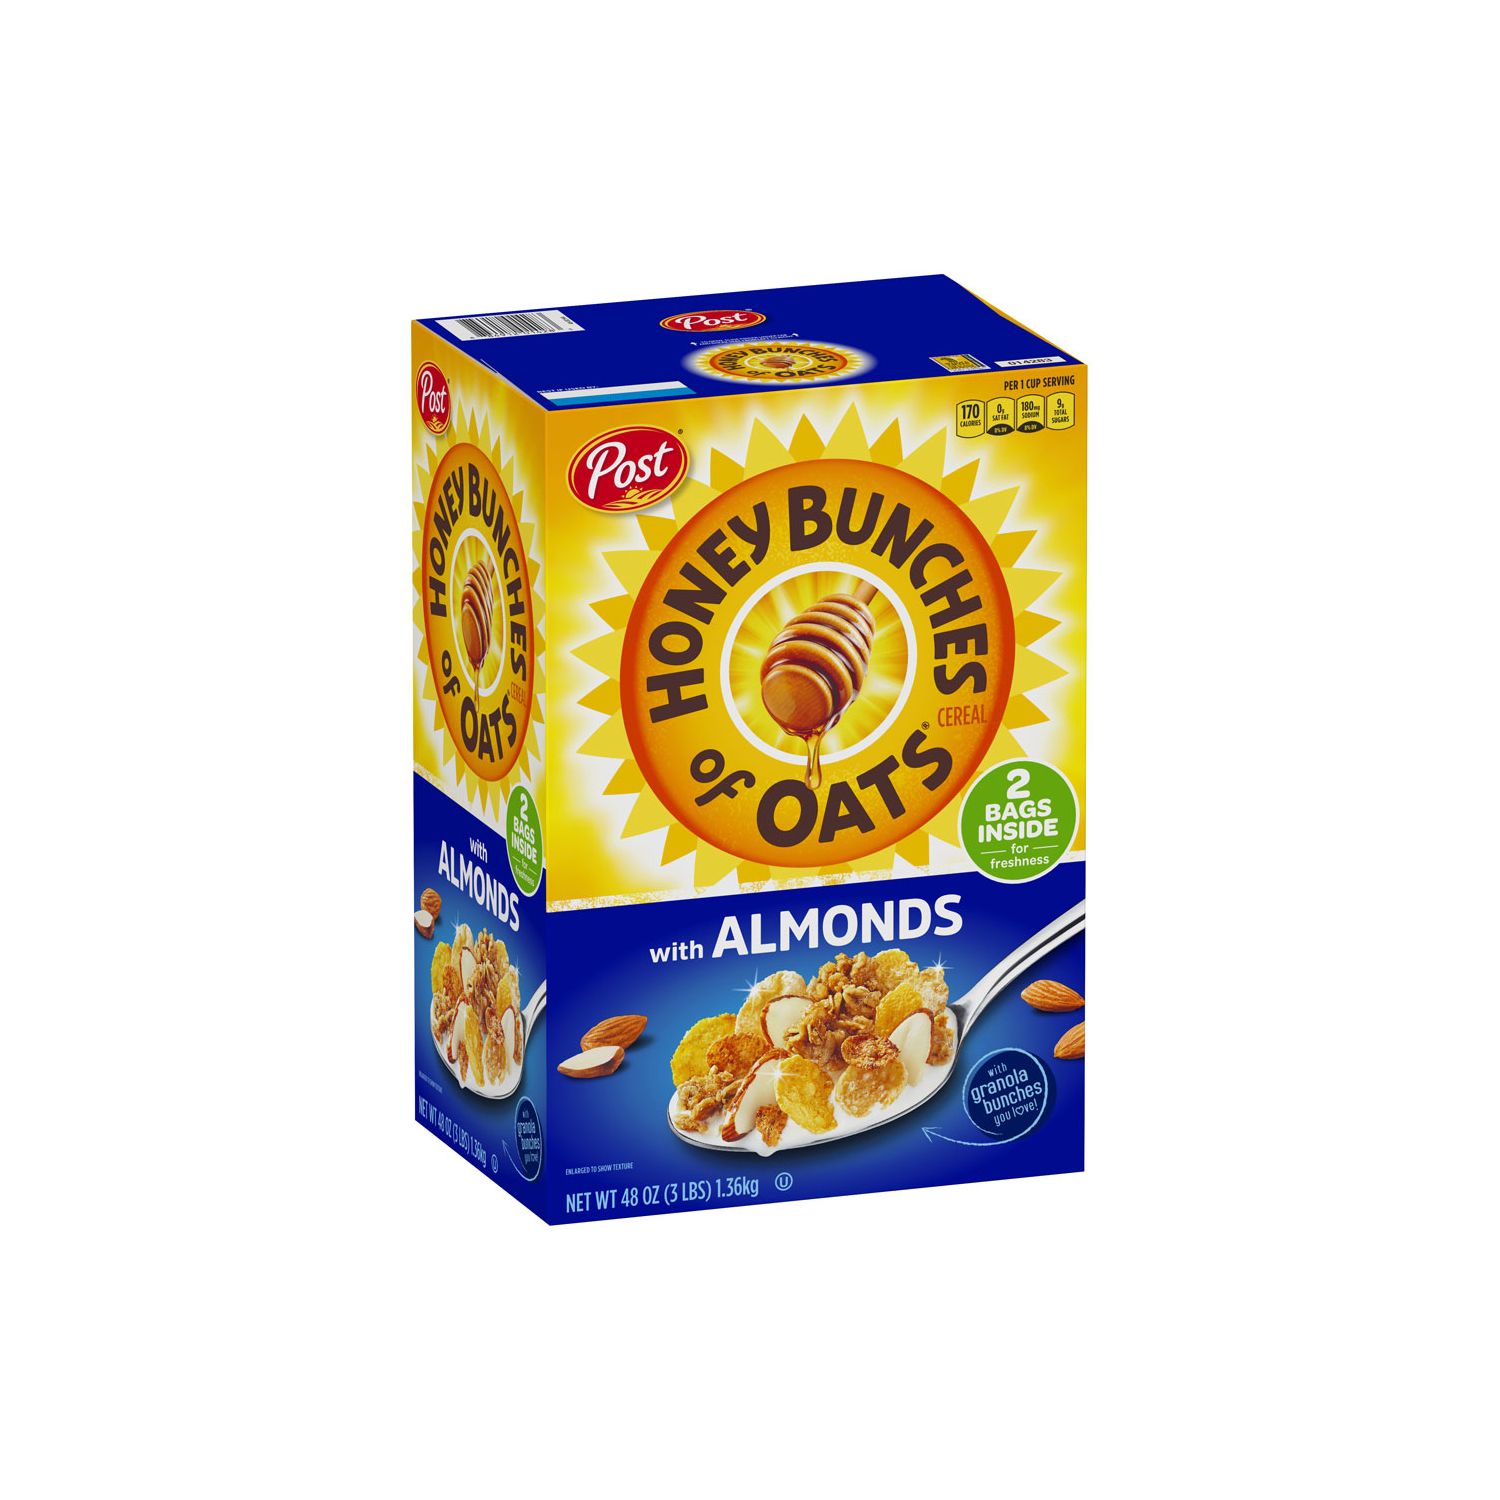 Honey Bunches of Oats with Almonds Cereal 48oz Box (4 Pack ...